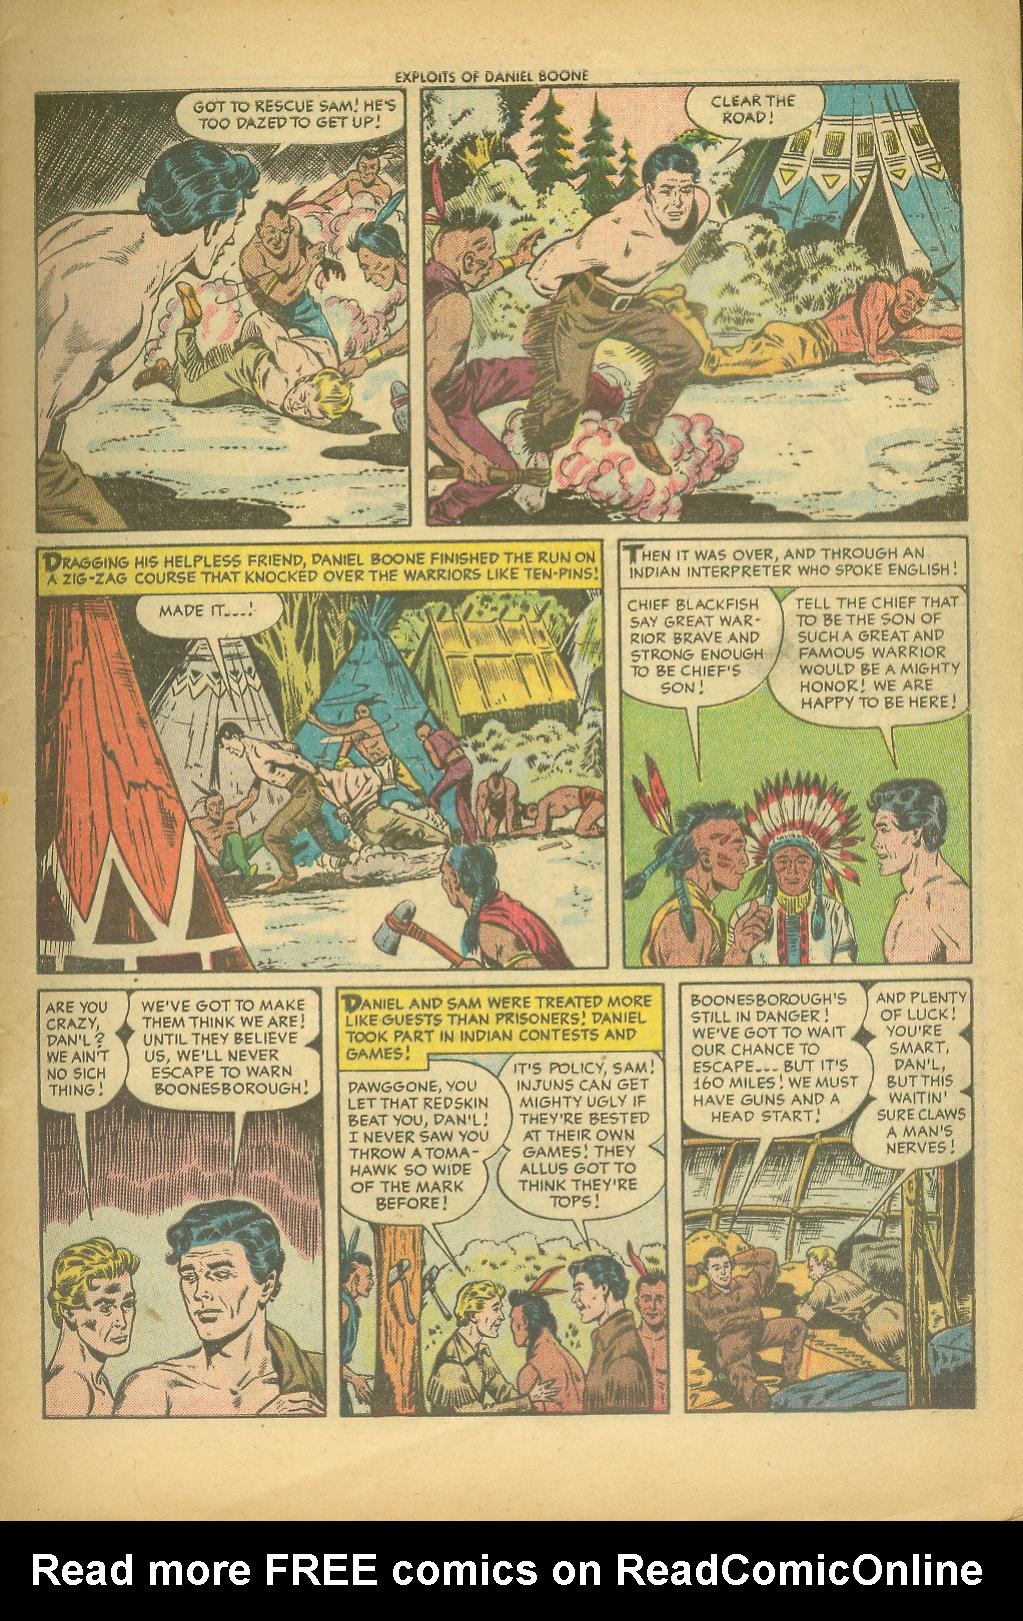 Read online Exploits of Daniel Boone comic -  Issue #1 - 9